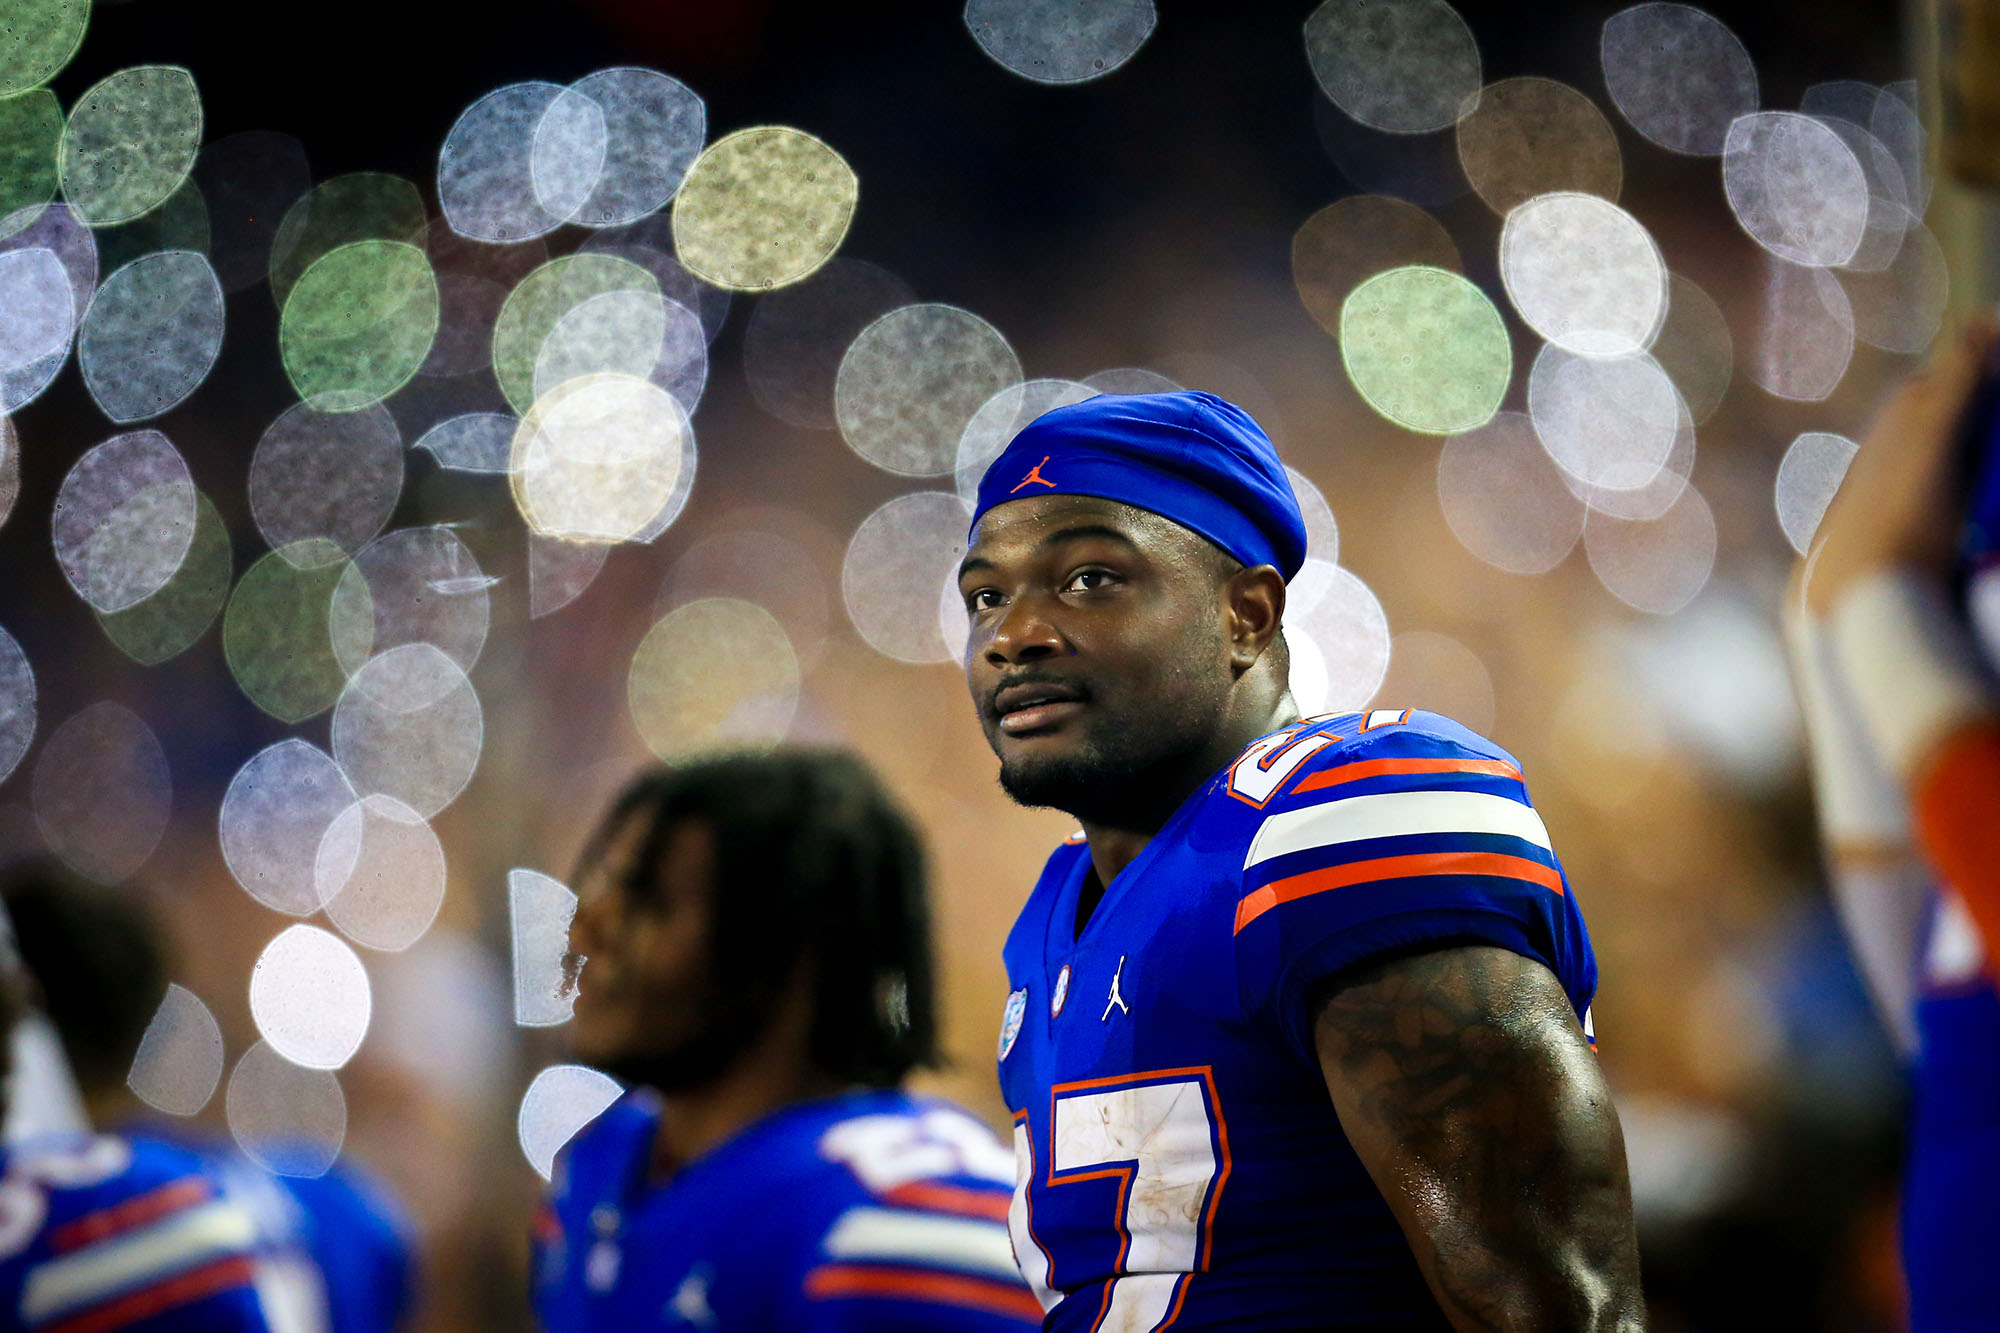 Florida Gators running back Dameon Pierce (27) on the sidelines against the Tennessee Volunteers during an NCAA college football game Saturday, Sept. 25, 2021, in Gainesville, Fla. (Matthew Stamey via AP)